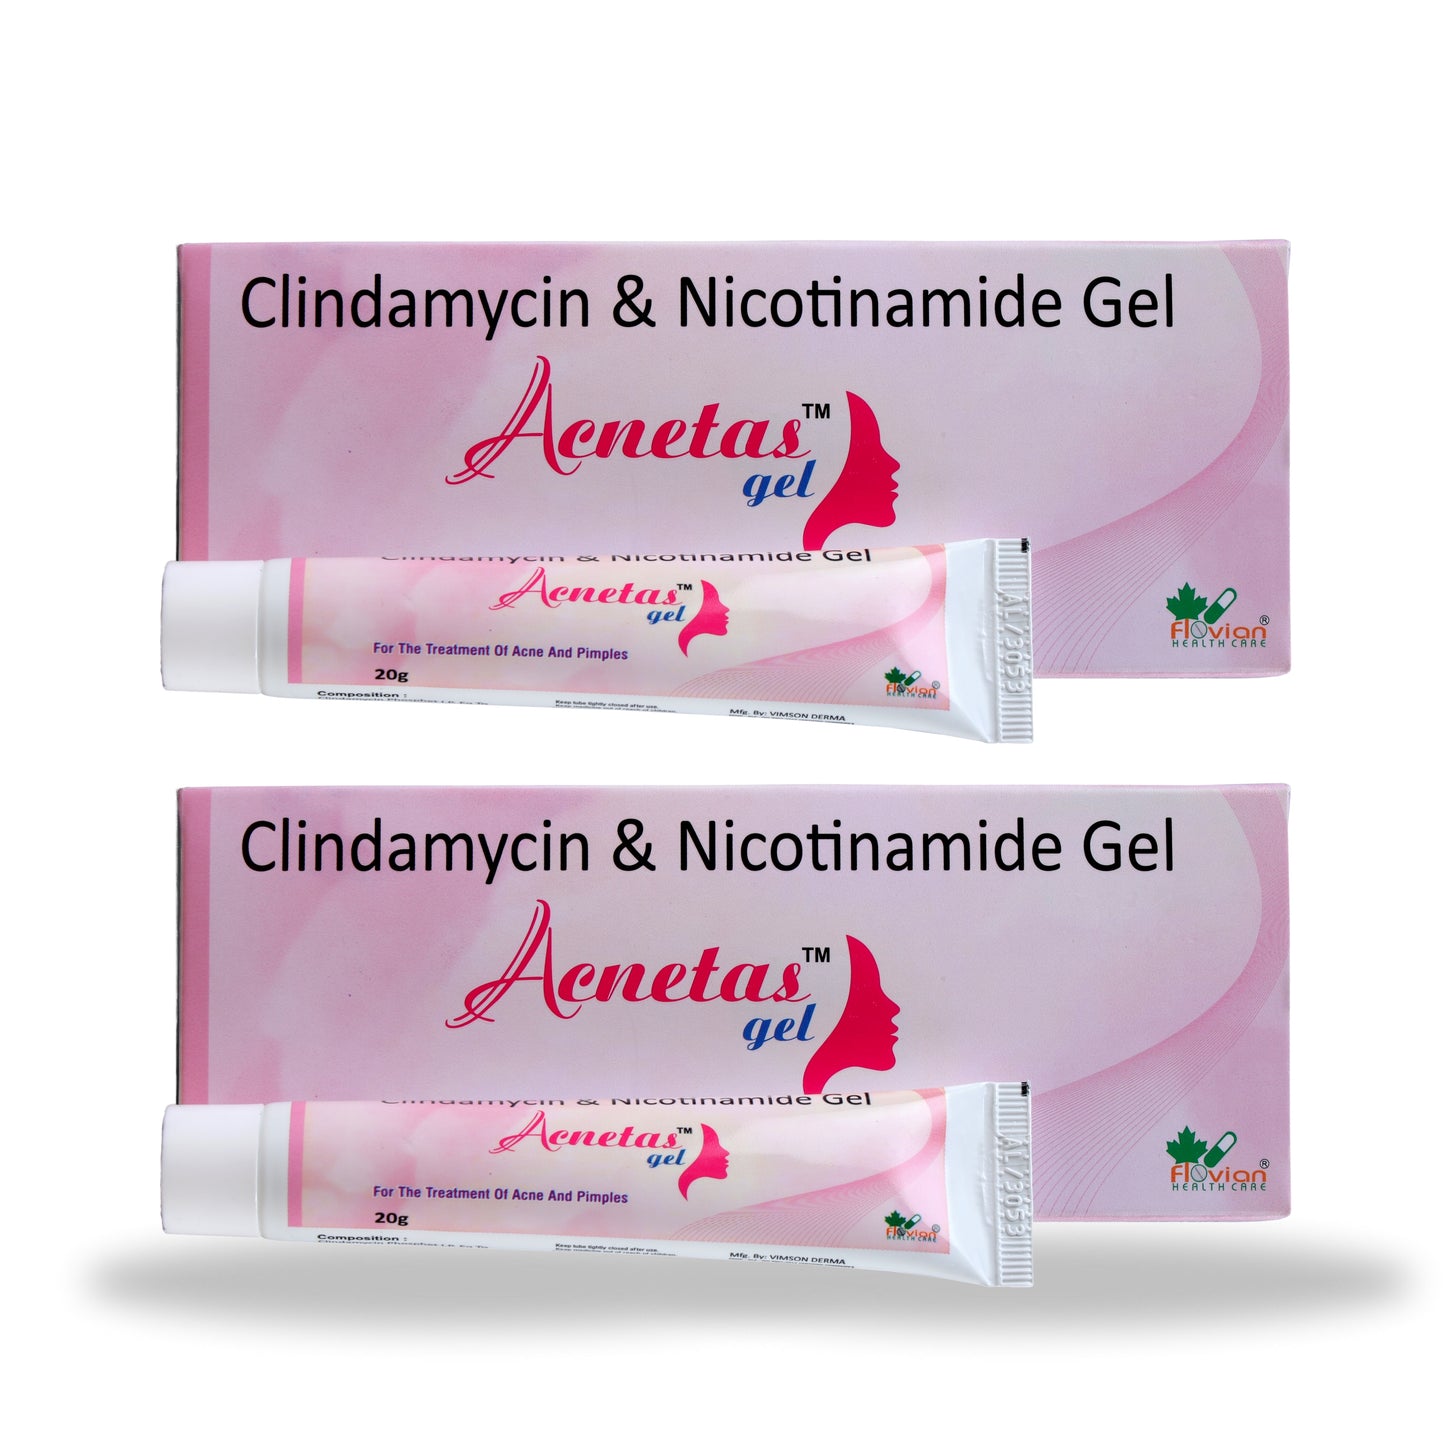 Acnetas Gel For The Treatment Of Acne And Pimple Pack Of (20gm) Each (2)